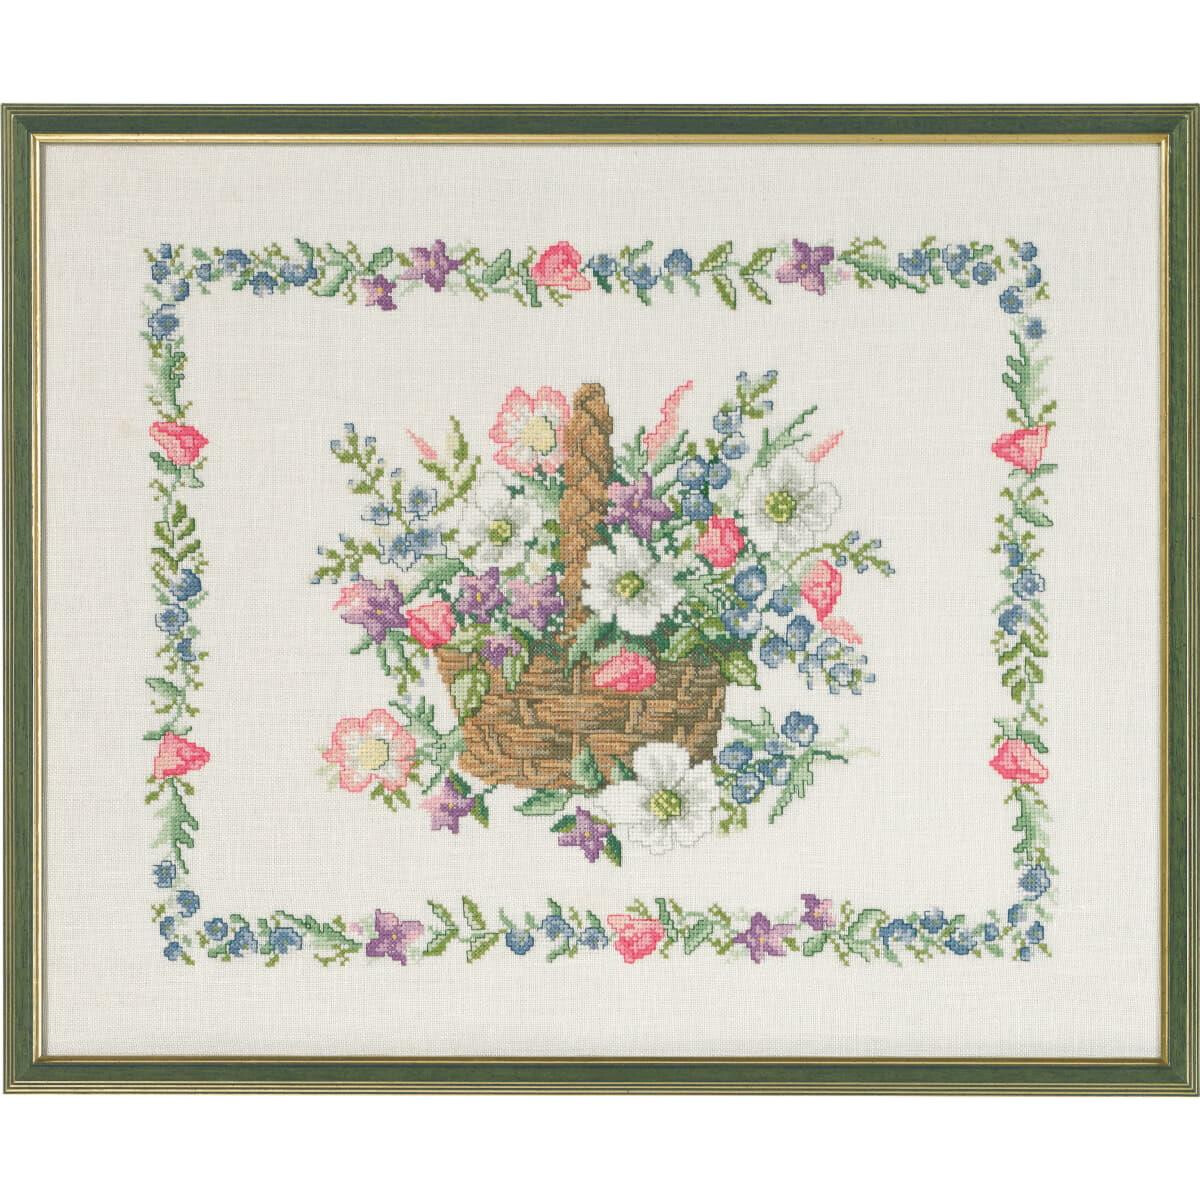 Permin counted cross stitch kit "Basket with...